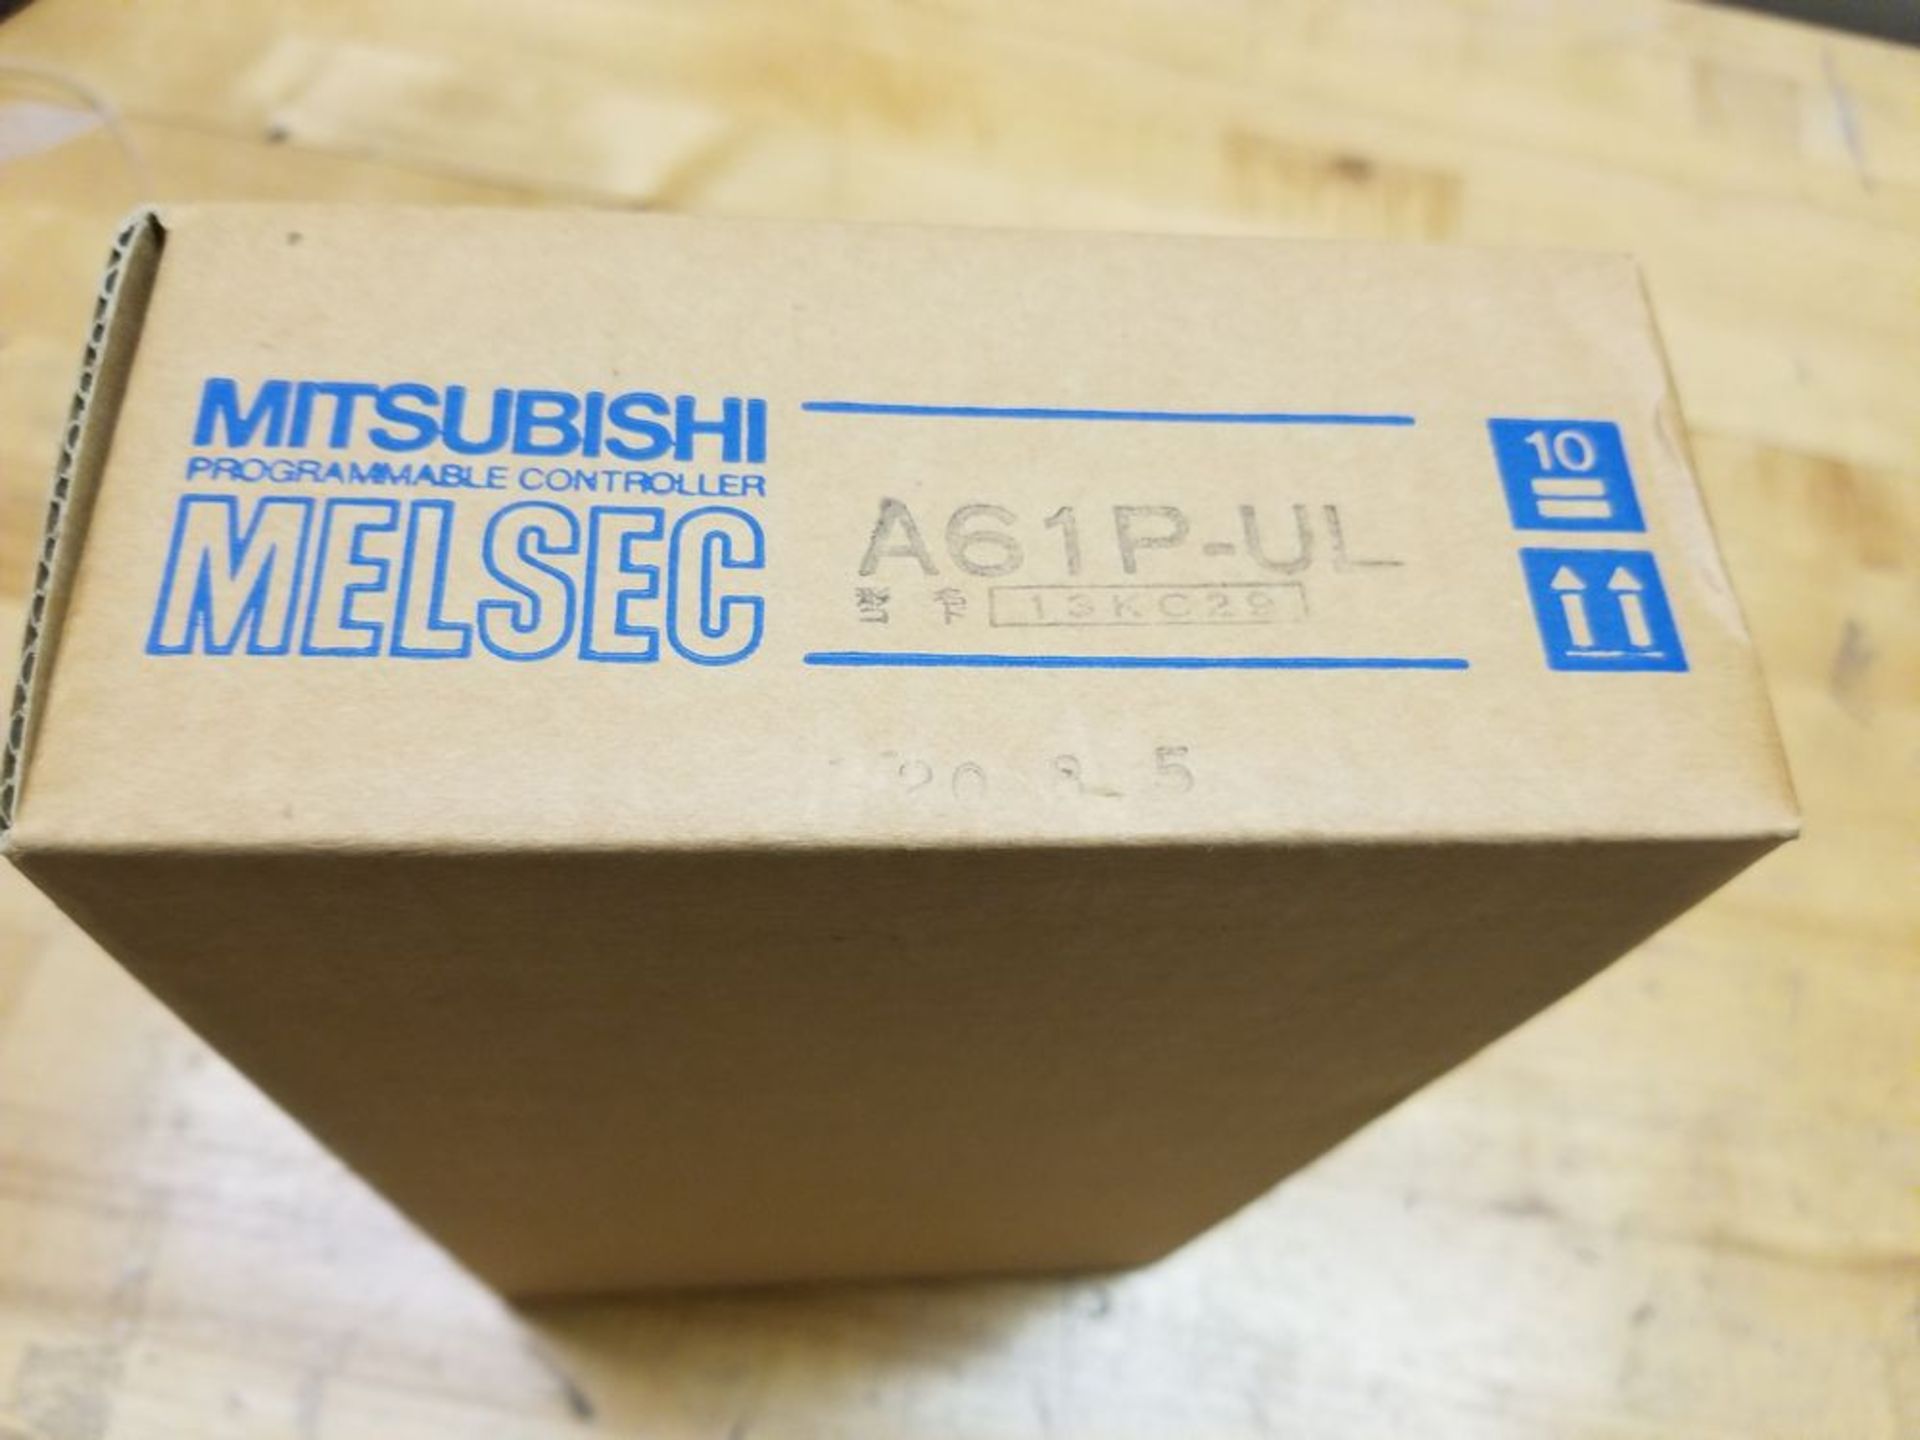 NEW MITSUBISHI MELSEC A61P-UL PLC POWER SUPPLY MODULE - Image 2 of 3